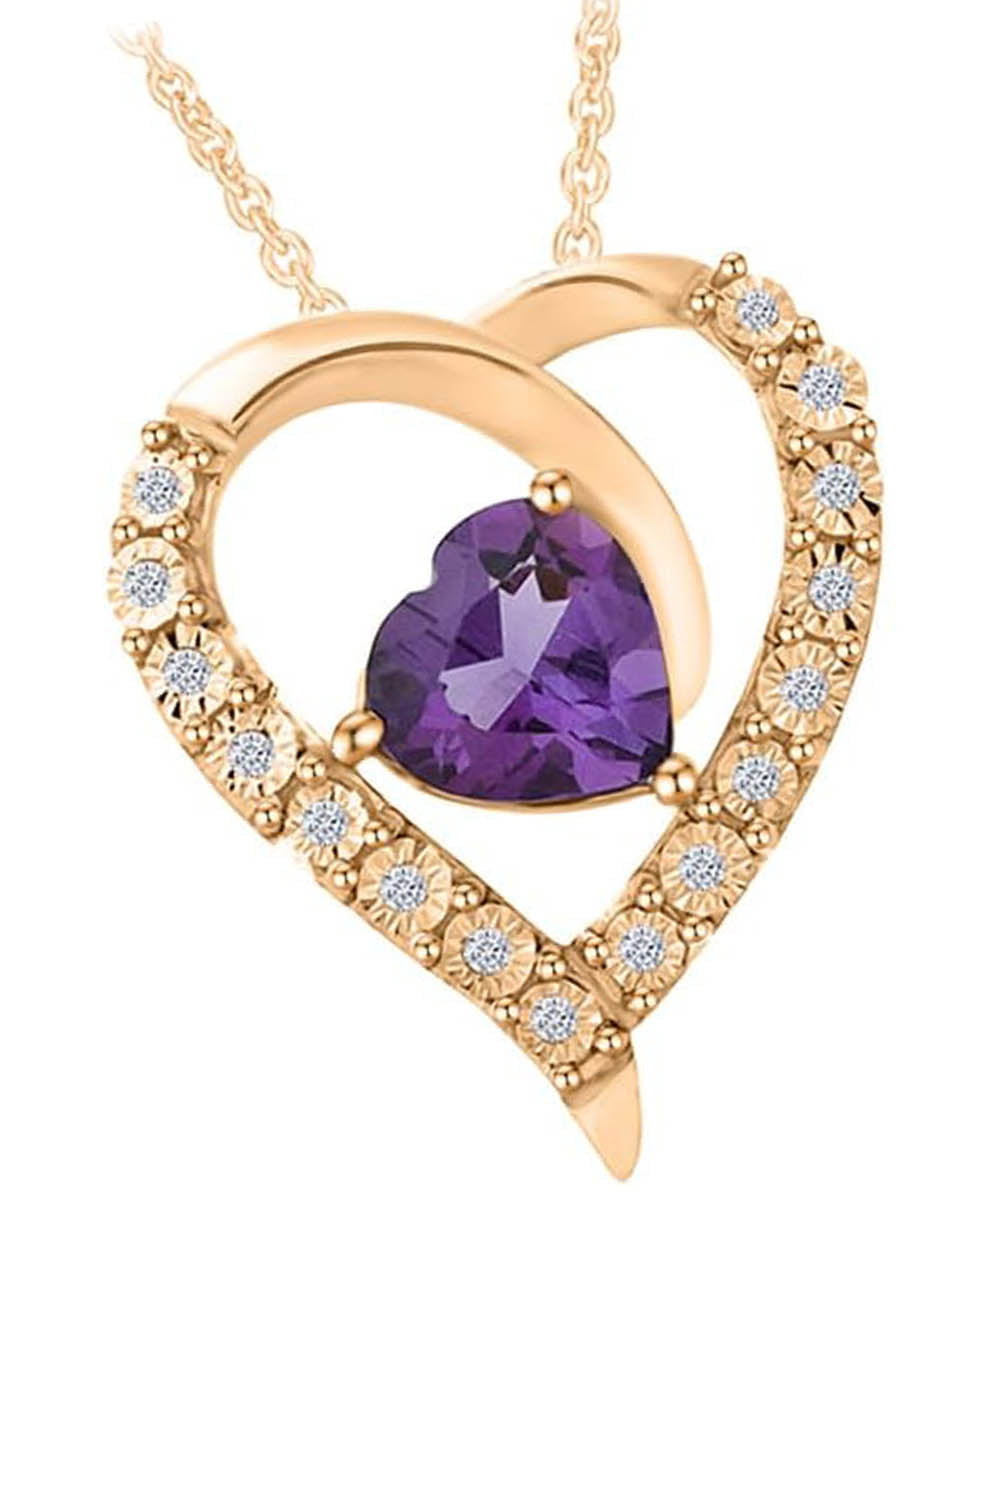 Yellow Gold Color Heart-Shape Simulated Amethyst Heart Pendant Necklace 